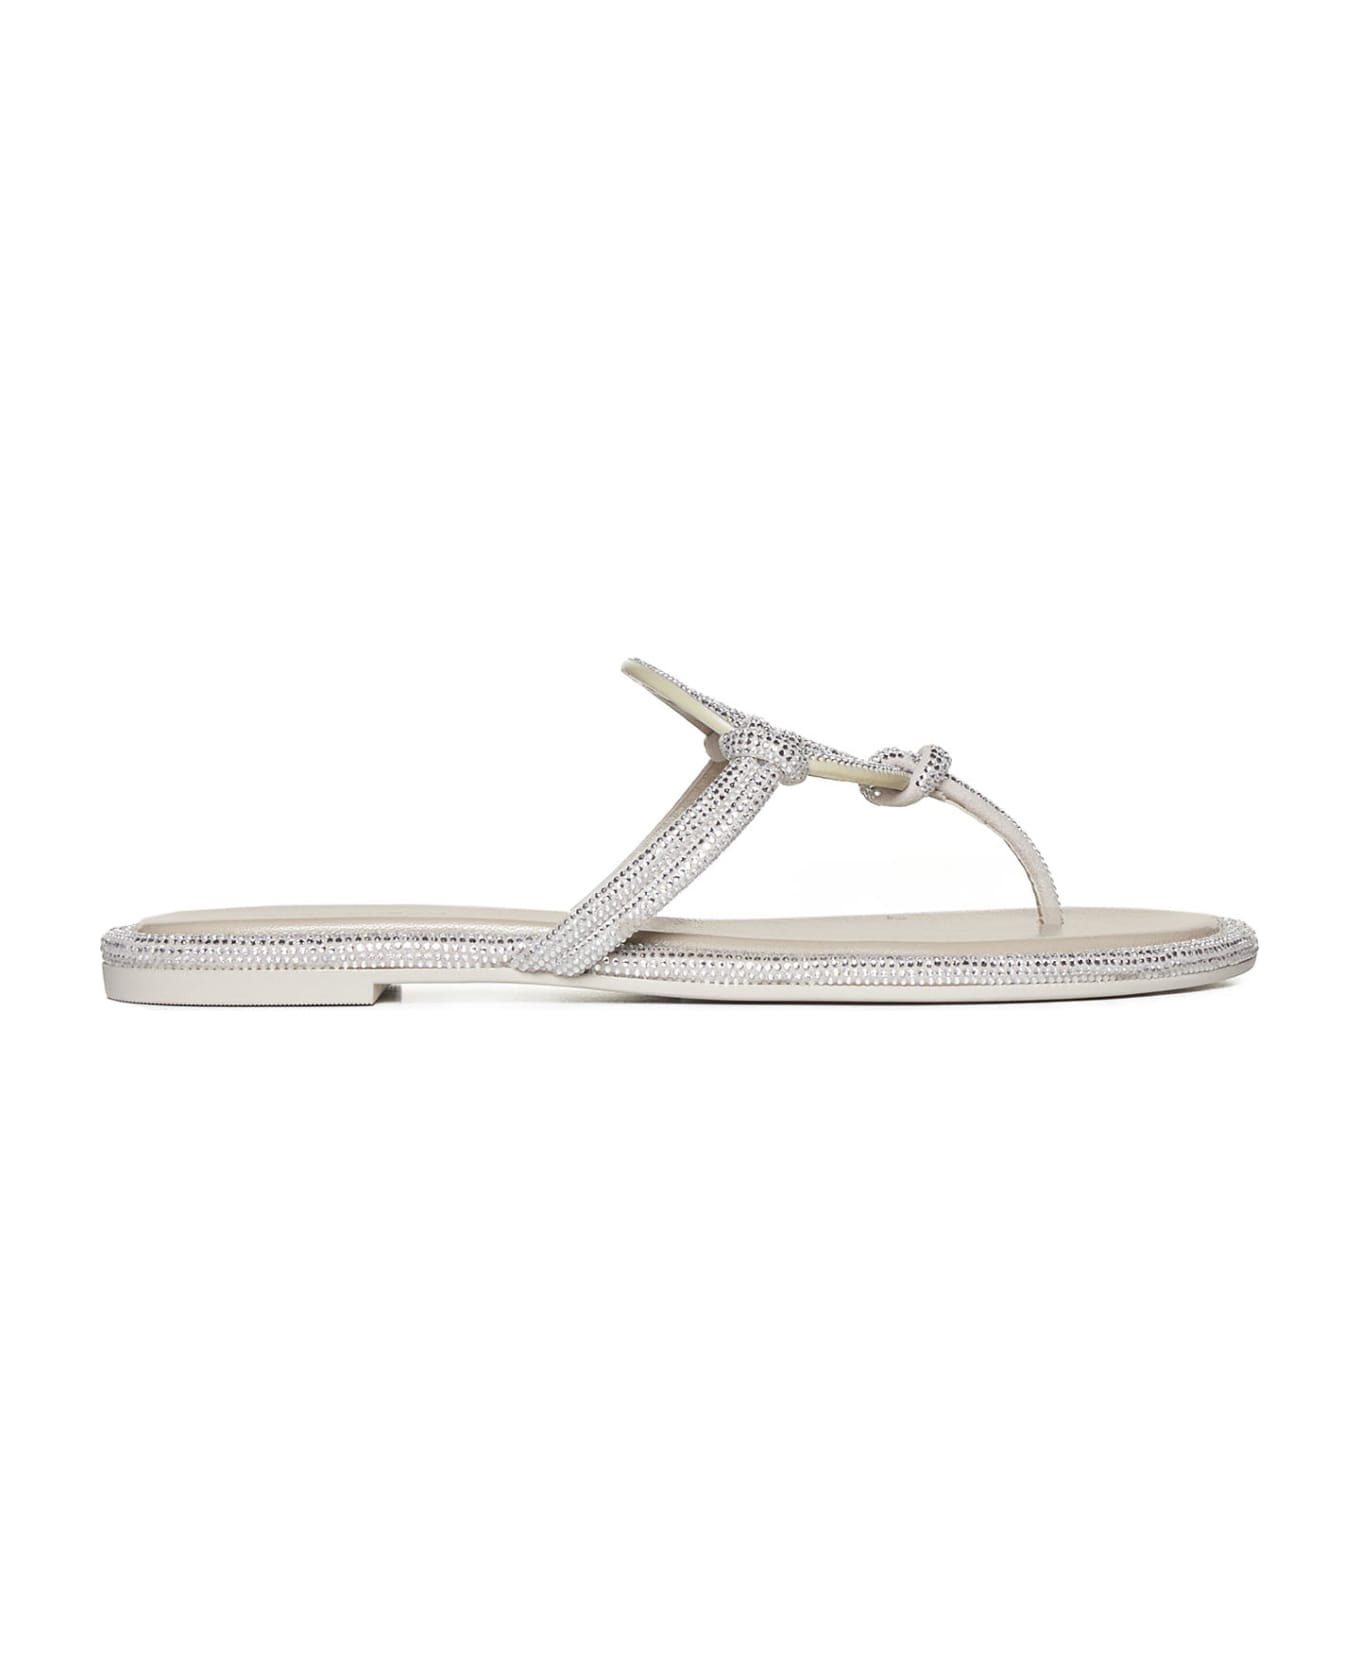 Tory Burch Miller Knotted Pave Sandals - Gray サンダル